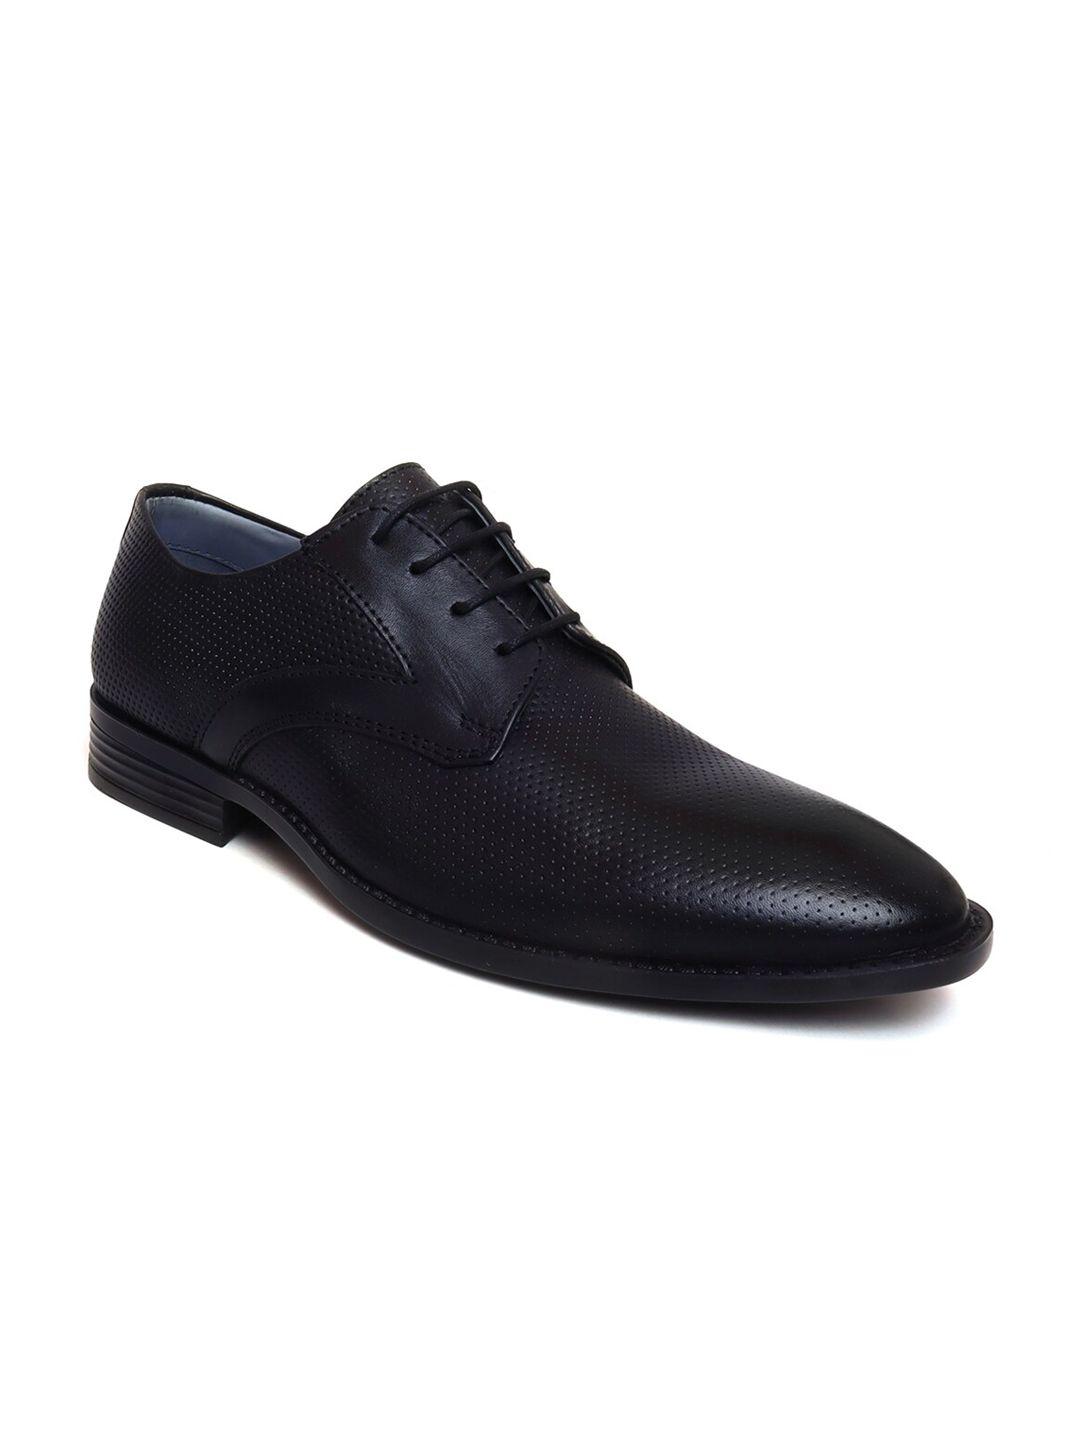 zoom shoes men black textured leather formal shoes